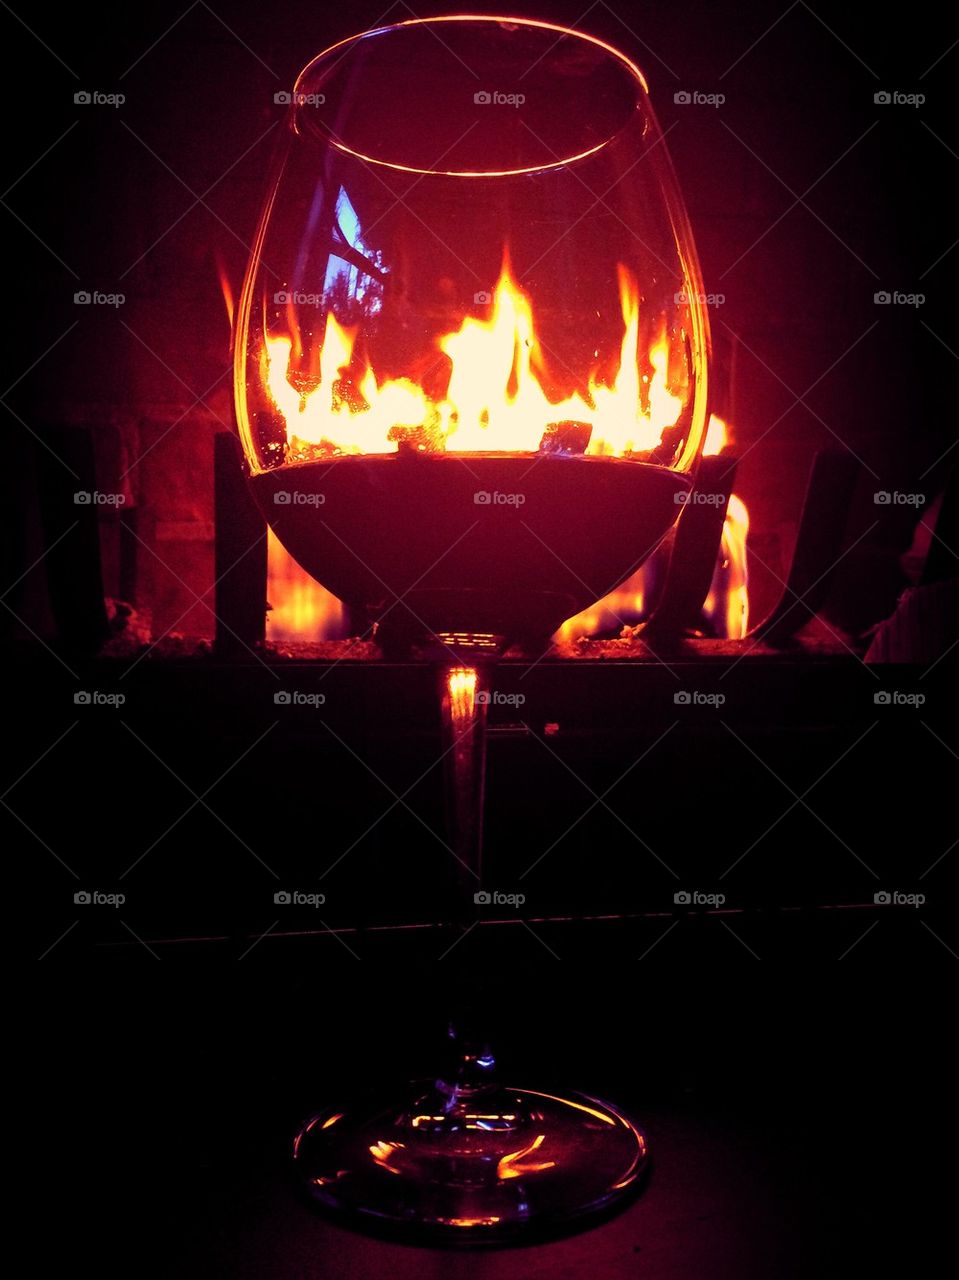 Fire in the wine glass